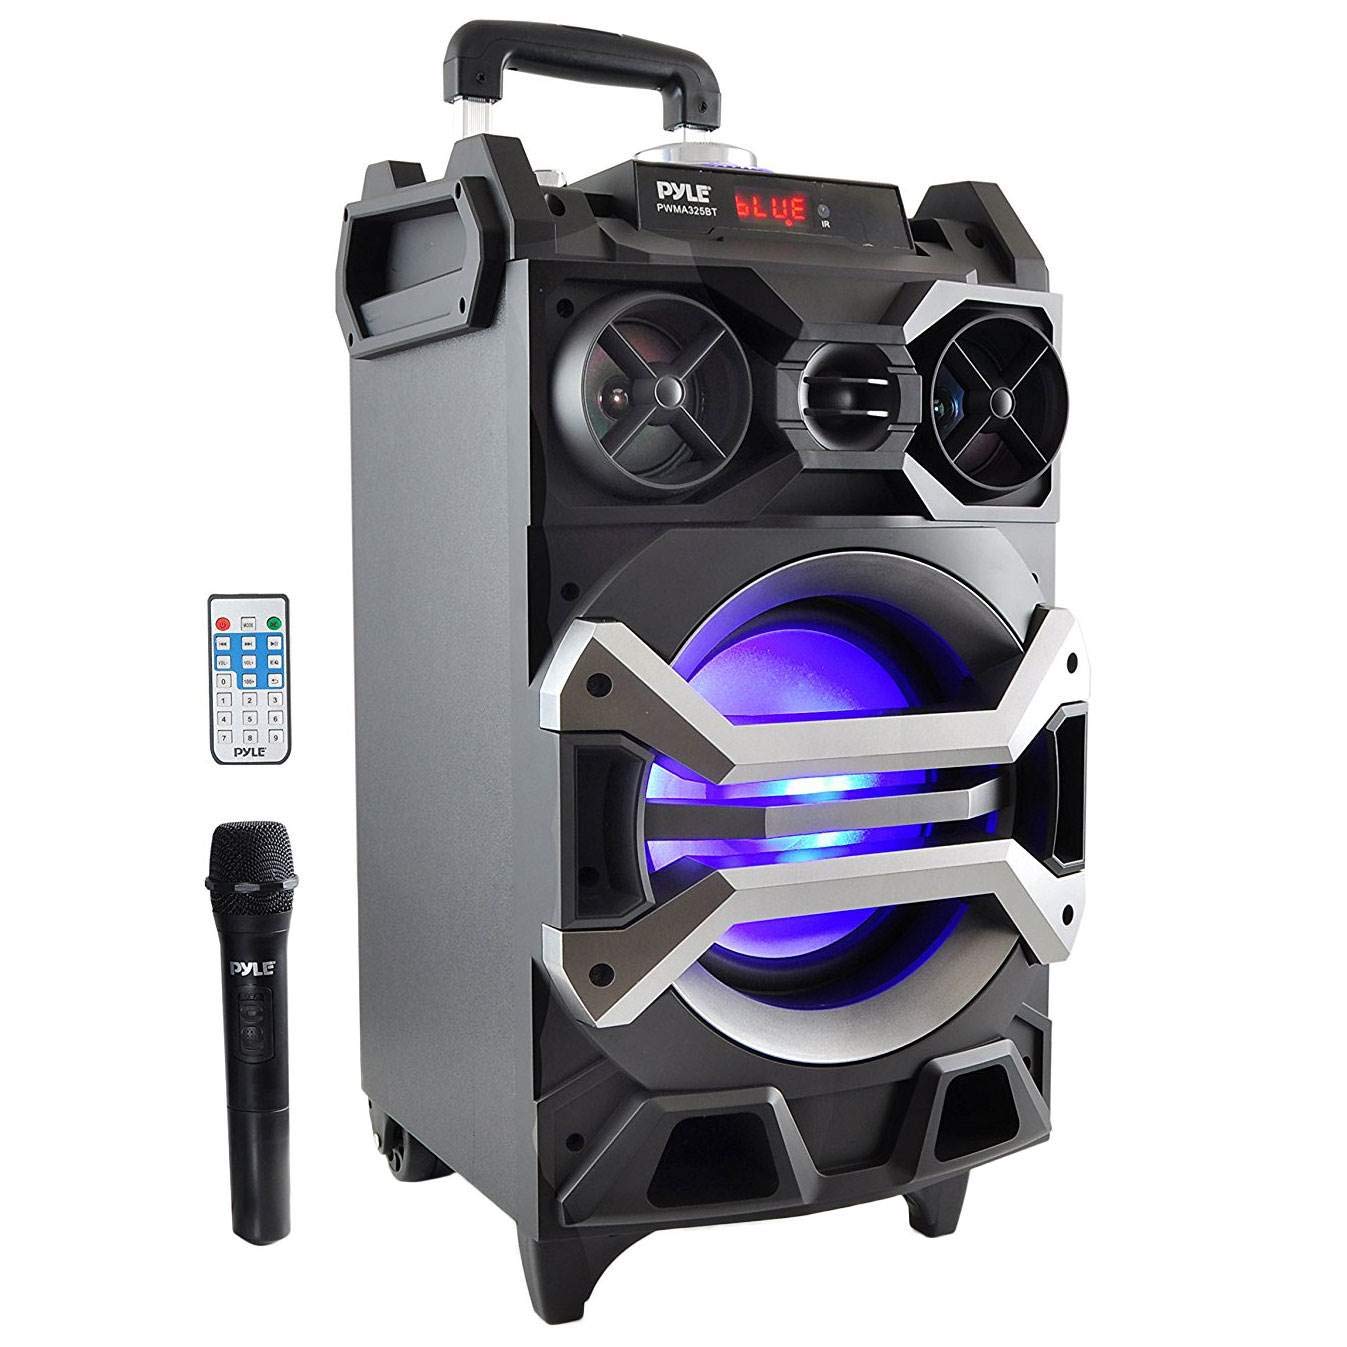 Pyle 500 Watt Outdoor Portable BT Connectivity Karaoke Speaker System - PA Stereo with 8